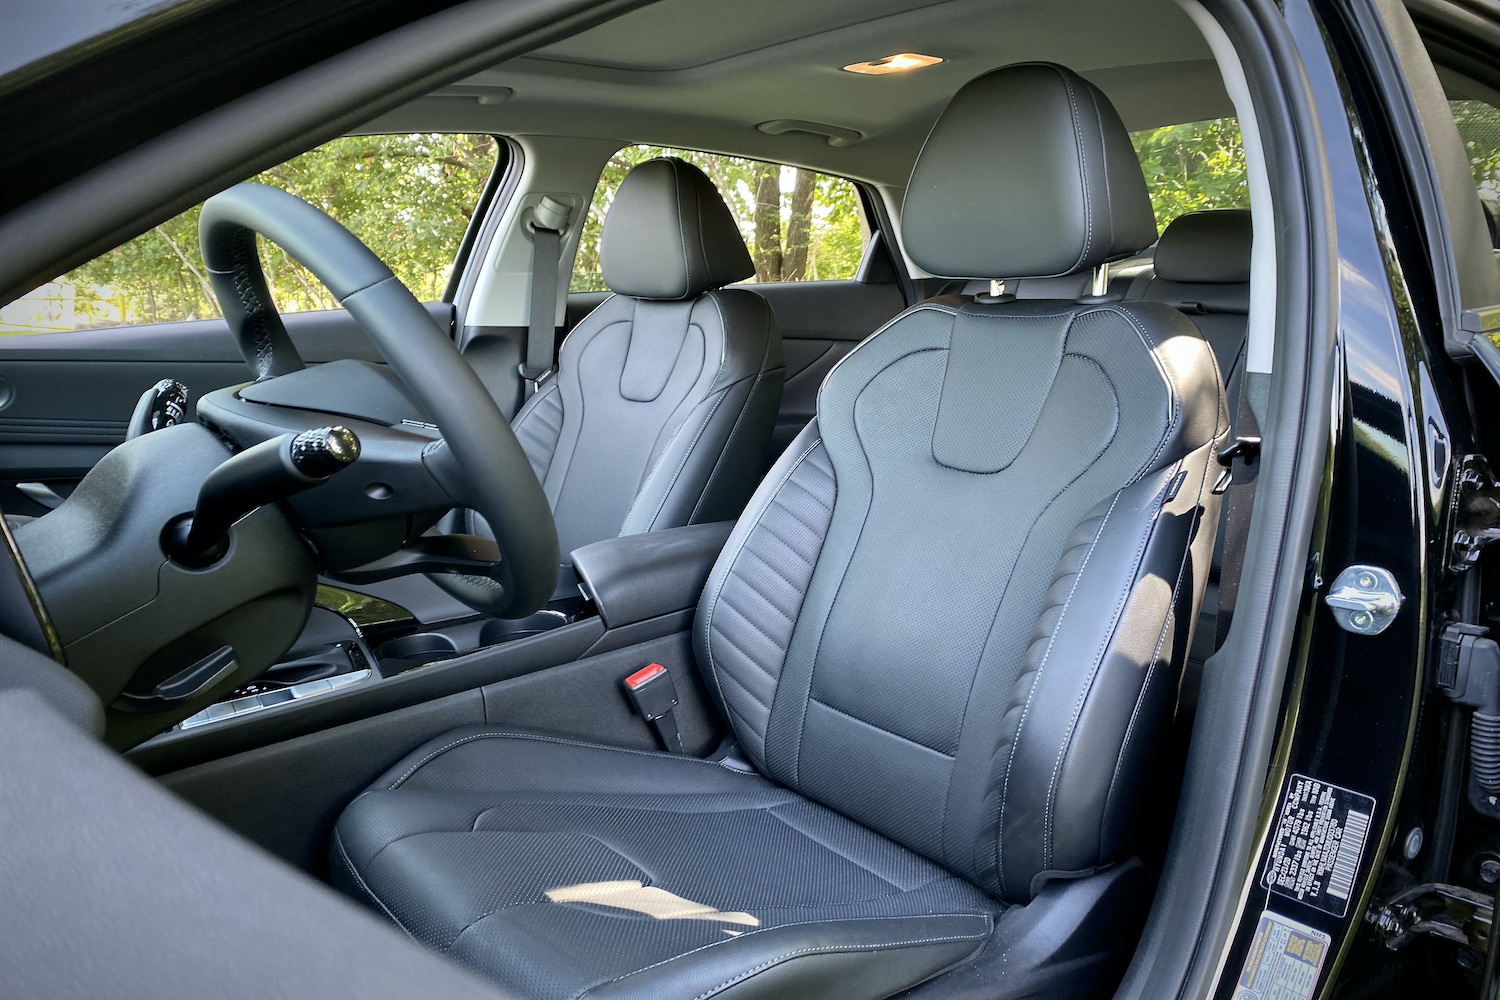 Driver's seat in the 2021 Hyundai Elantra Hybrid from the front.